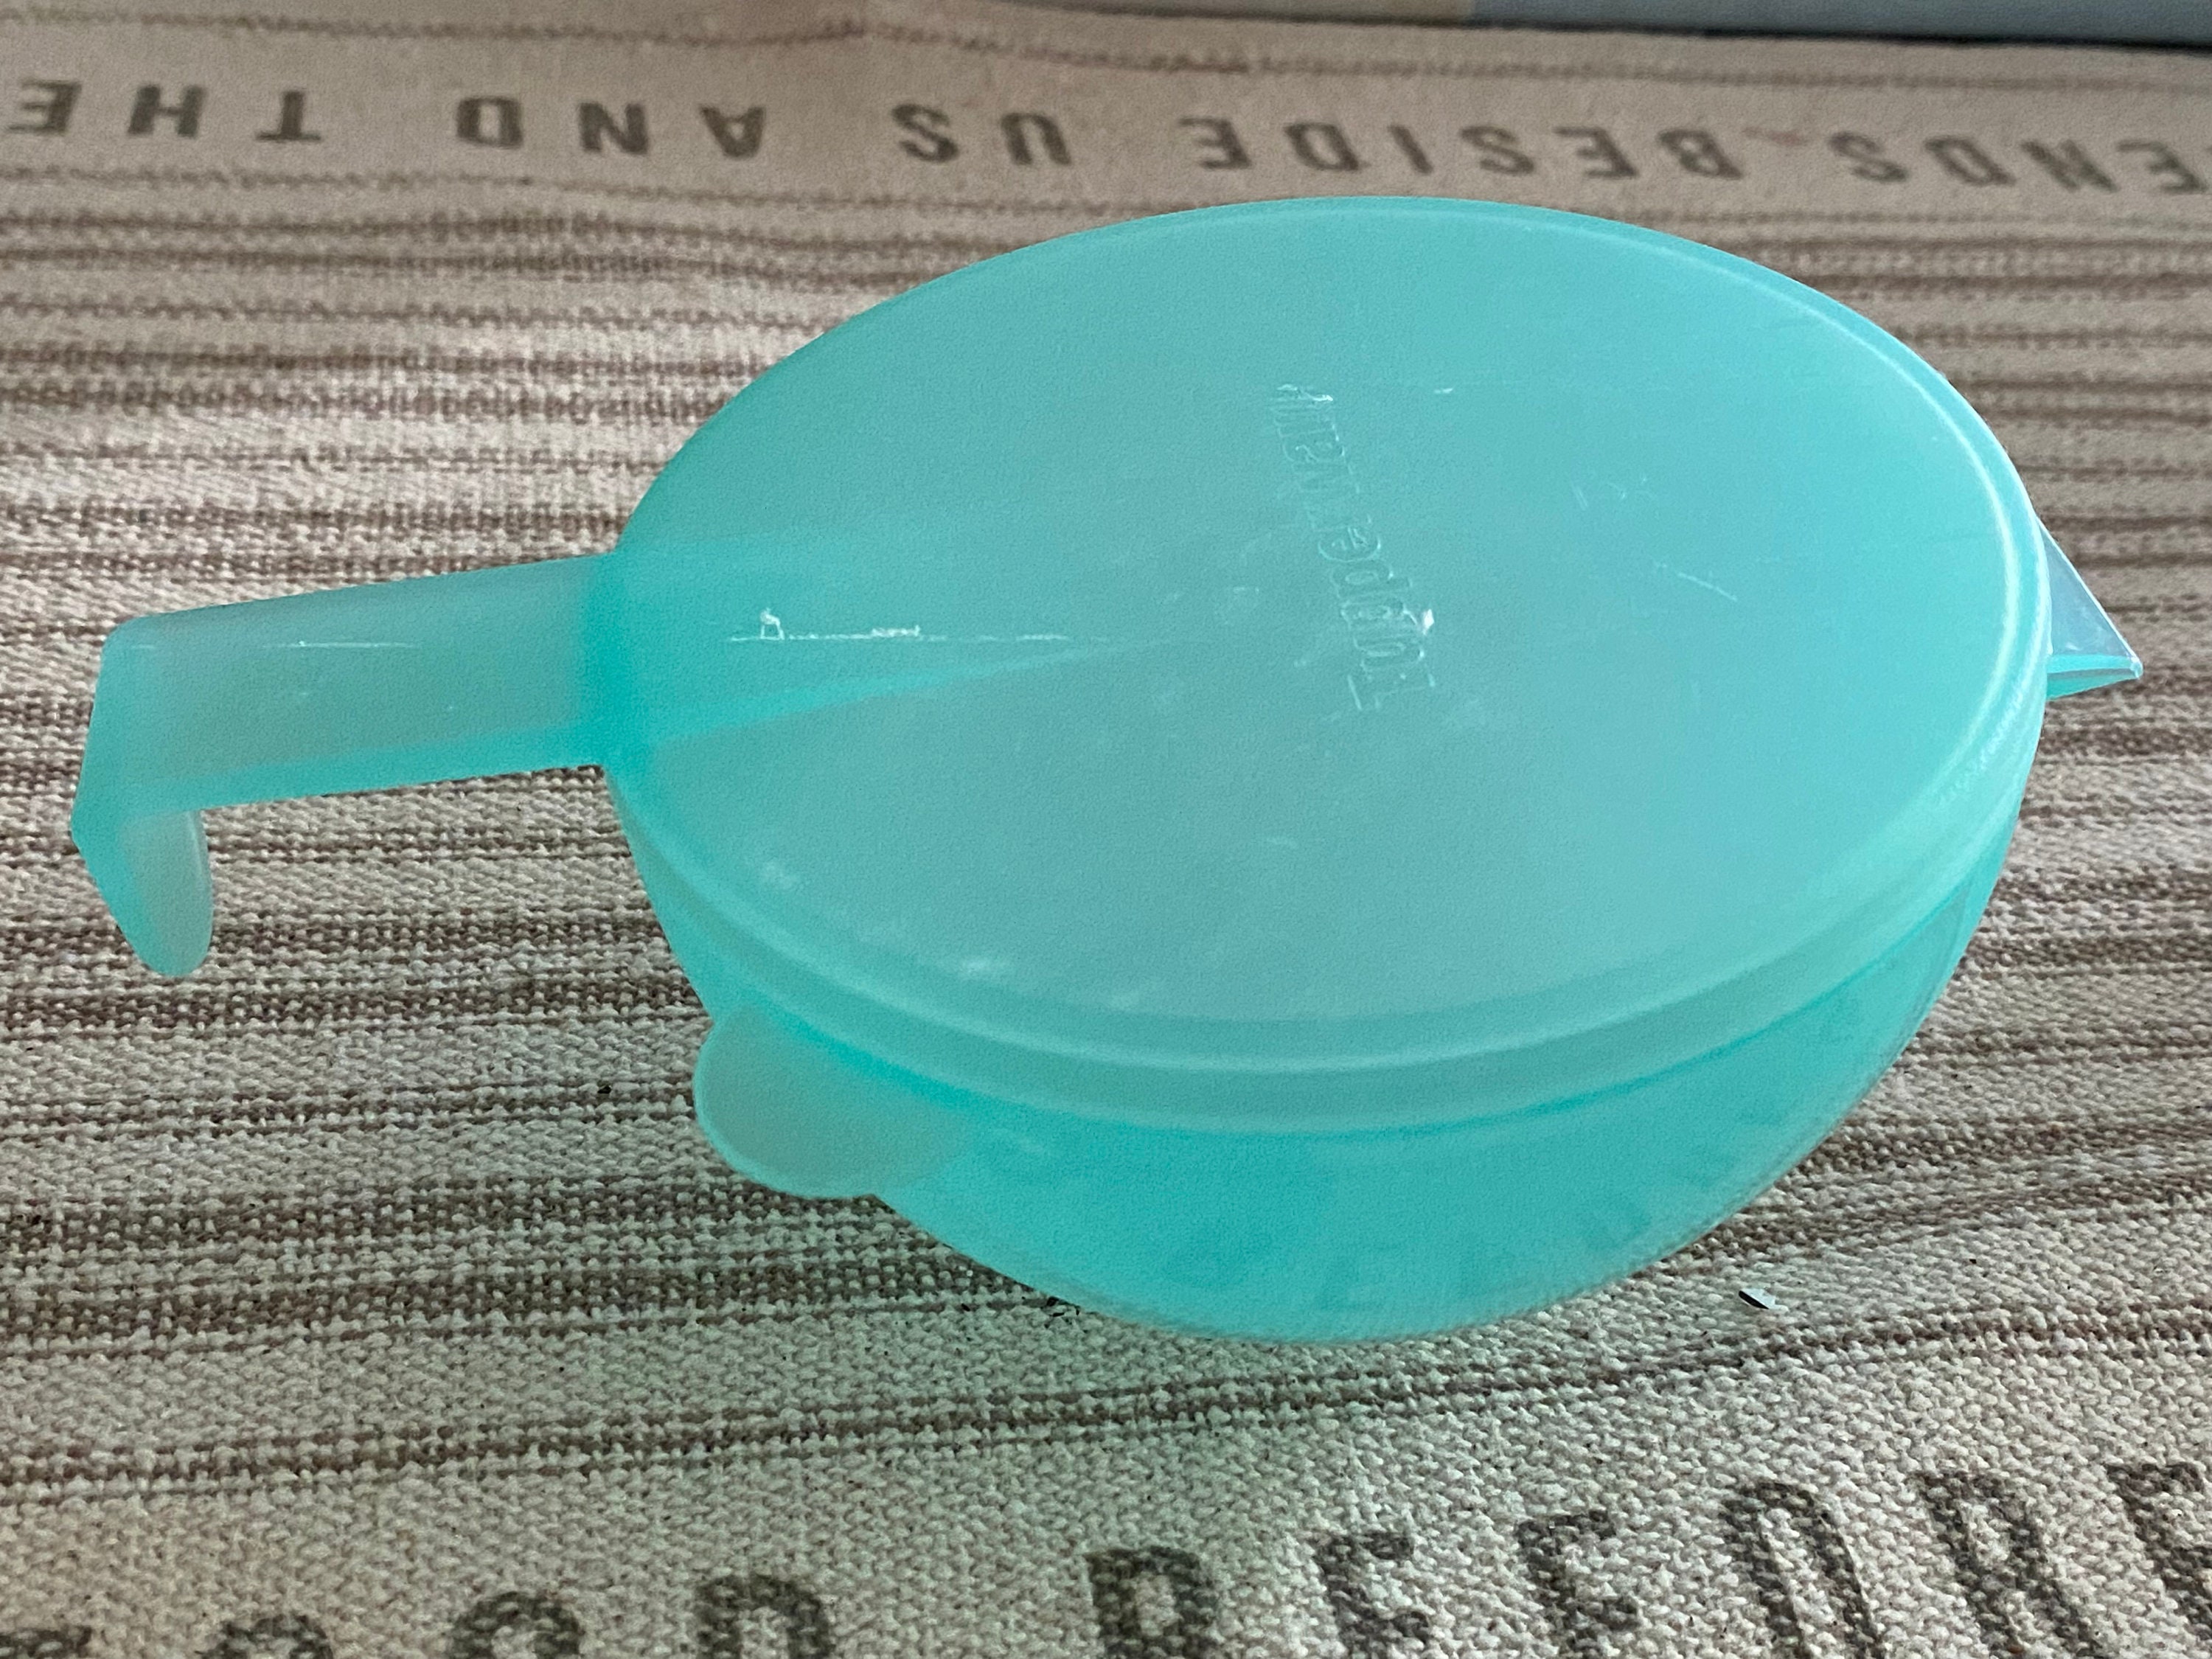 Just found this sub! Had to borrow the image from Pinterest, as my mom has  this item. Parents inherited this Tupperware marinade container when my  grandma passed in 97/98. Grandma owned it